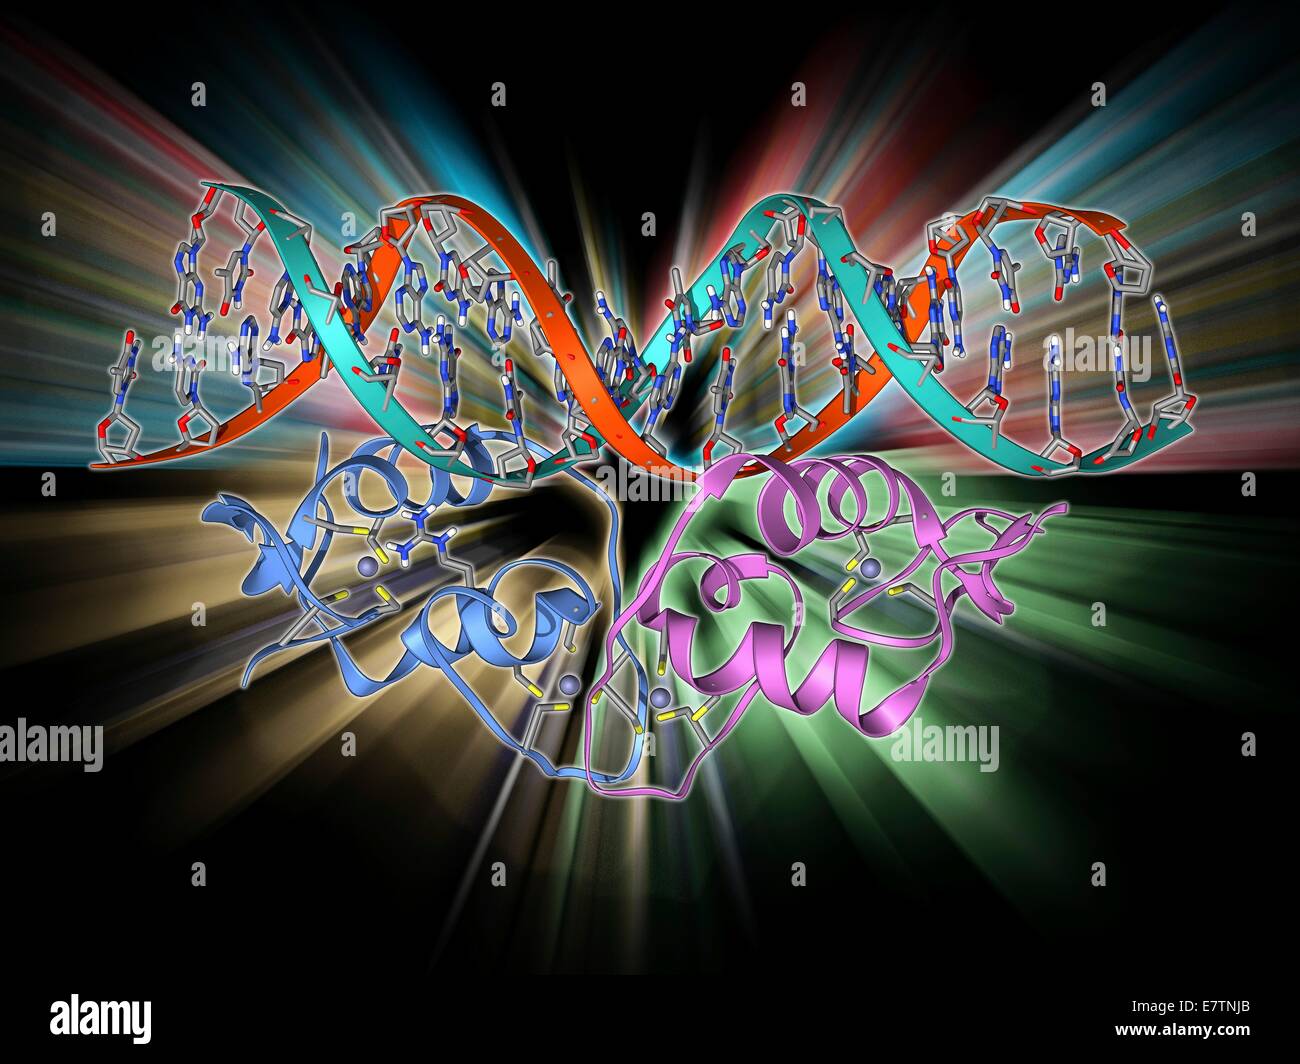 Transcription factor and DNA molecule. Molecular model of glucocorticoid receptor (GR) transcription factor protein (pink and blue) complexed with a molecule of DNA (deoxyribonucleic acid, red and blue). Transcription factors regulate the transcription of Stock Photo